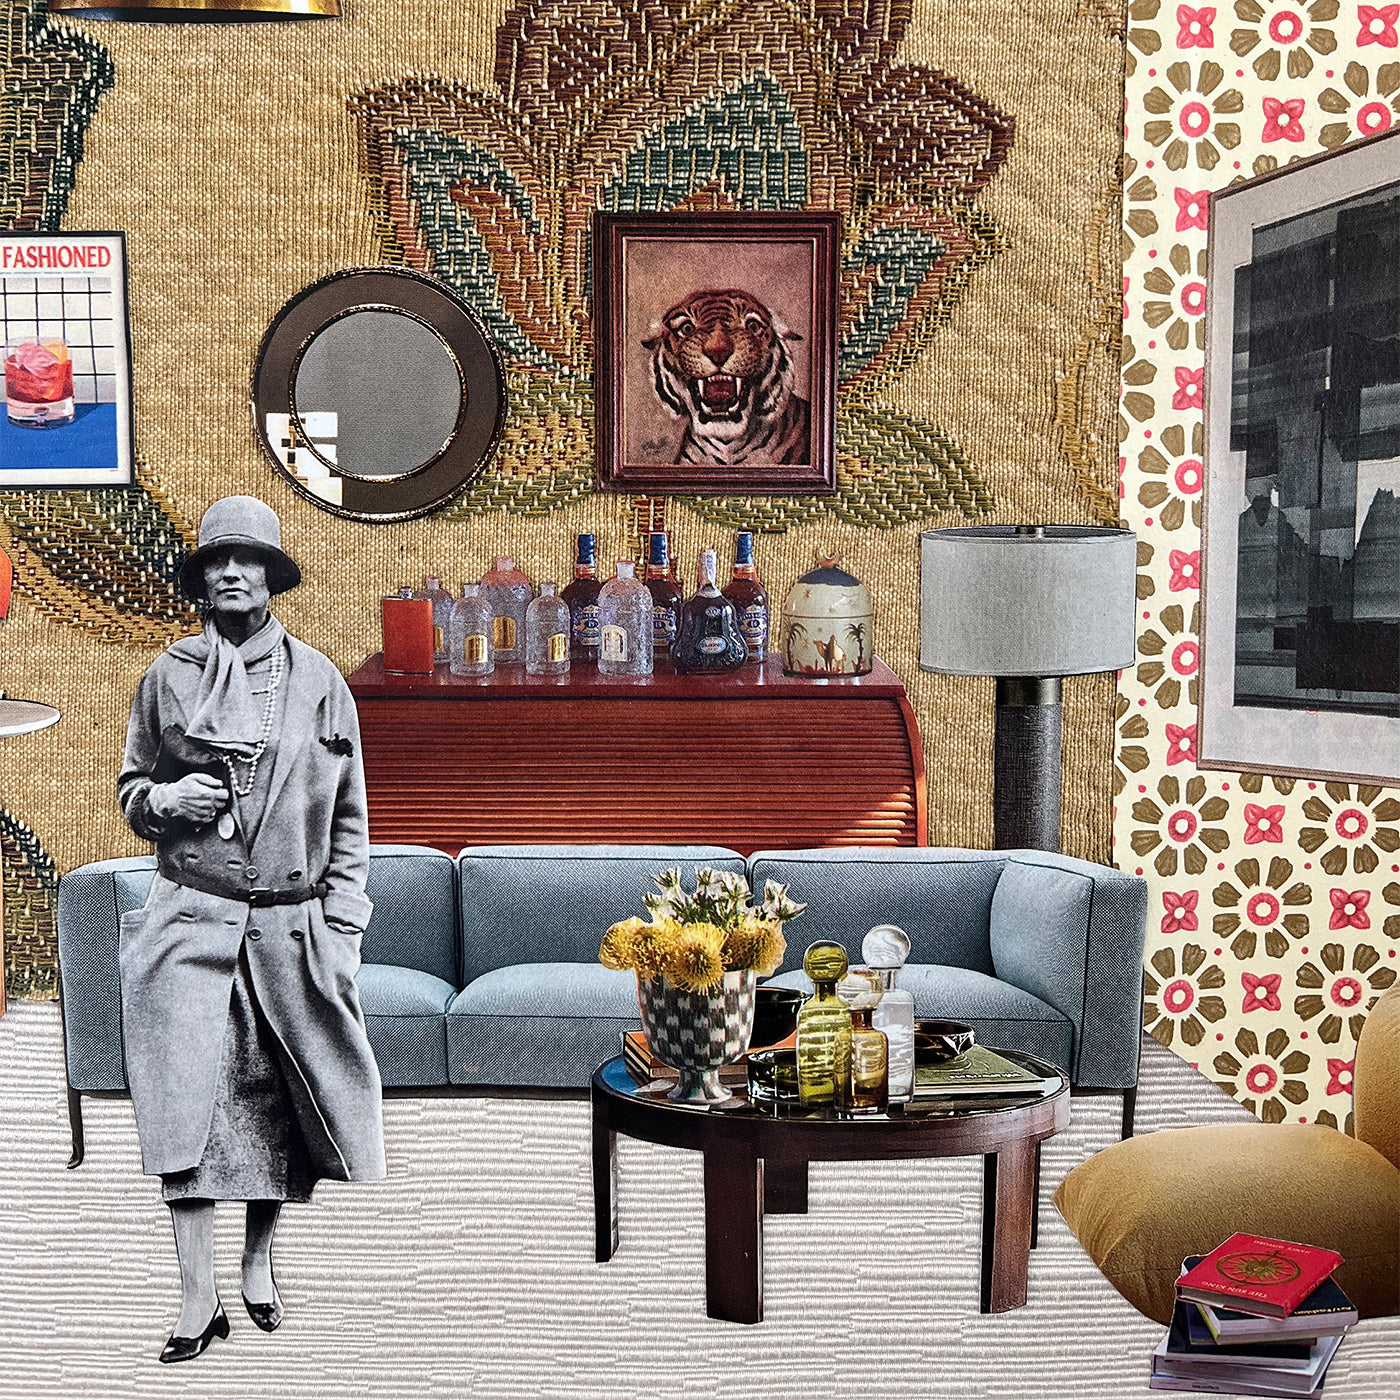 Coco Chanel Collage with Recycled Materials - Alternative view 2